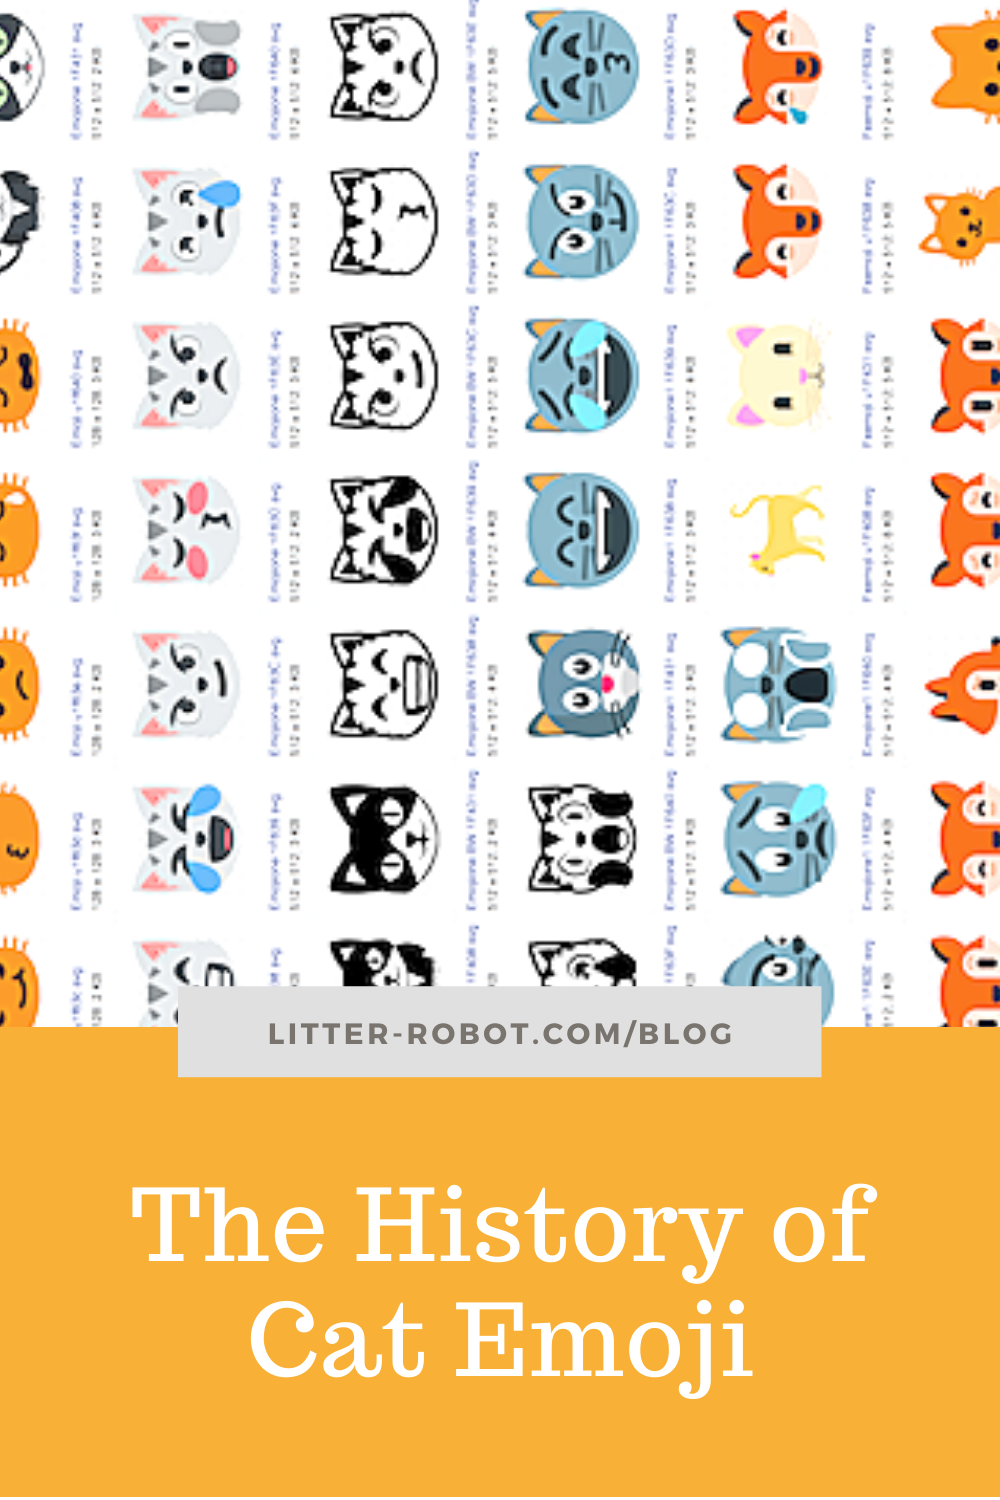 The History of Cat Emoji | Learn more on Litter-Robot Blog